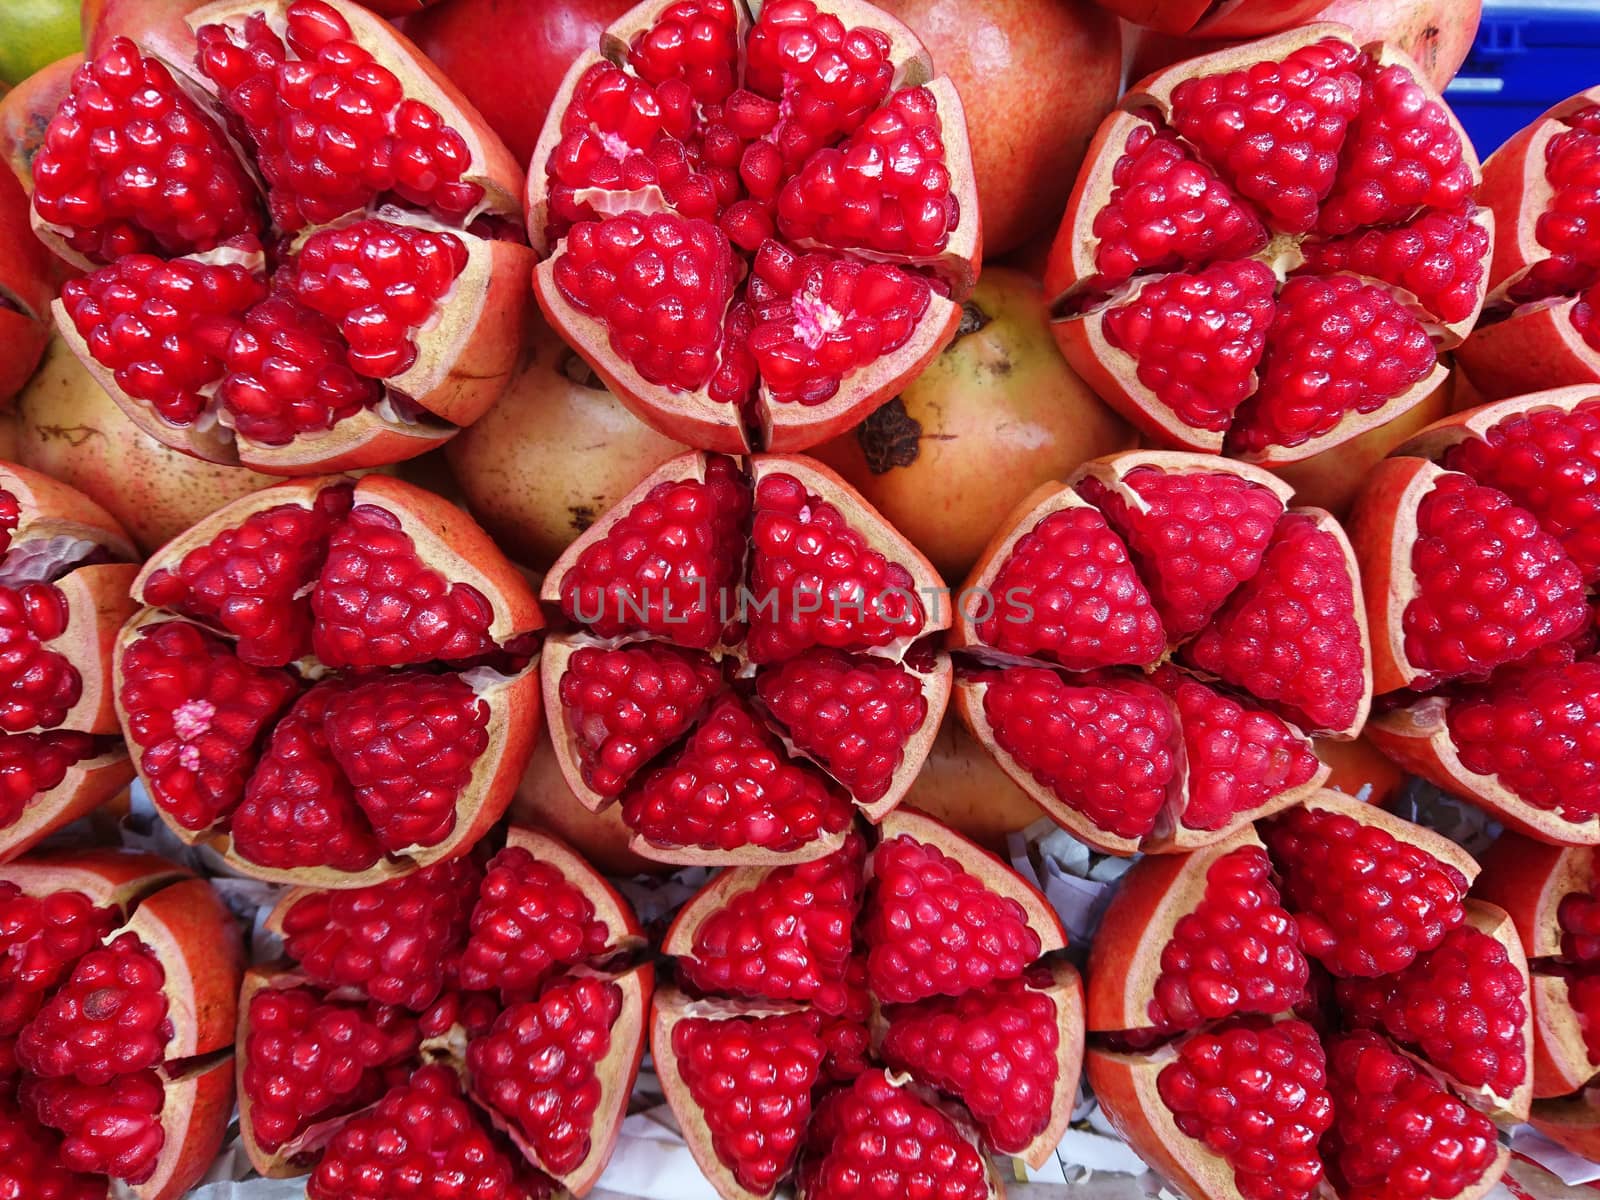 Pomegranate cut of half show for sale in market